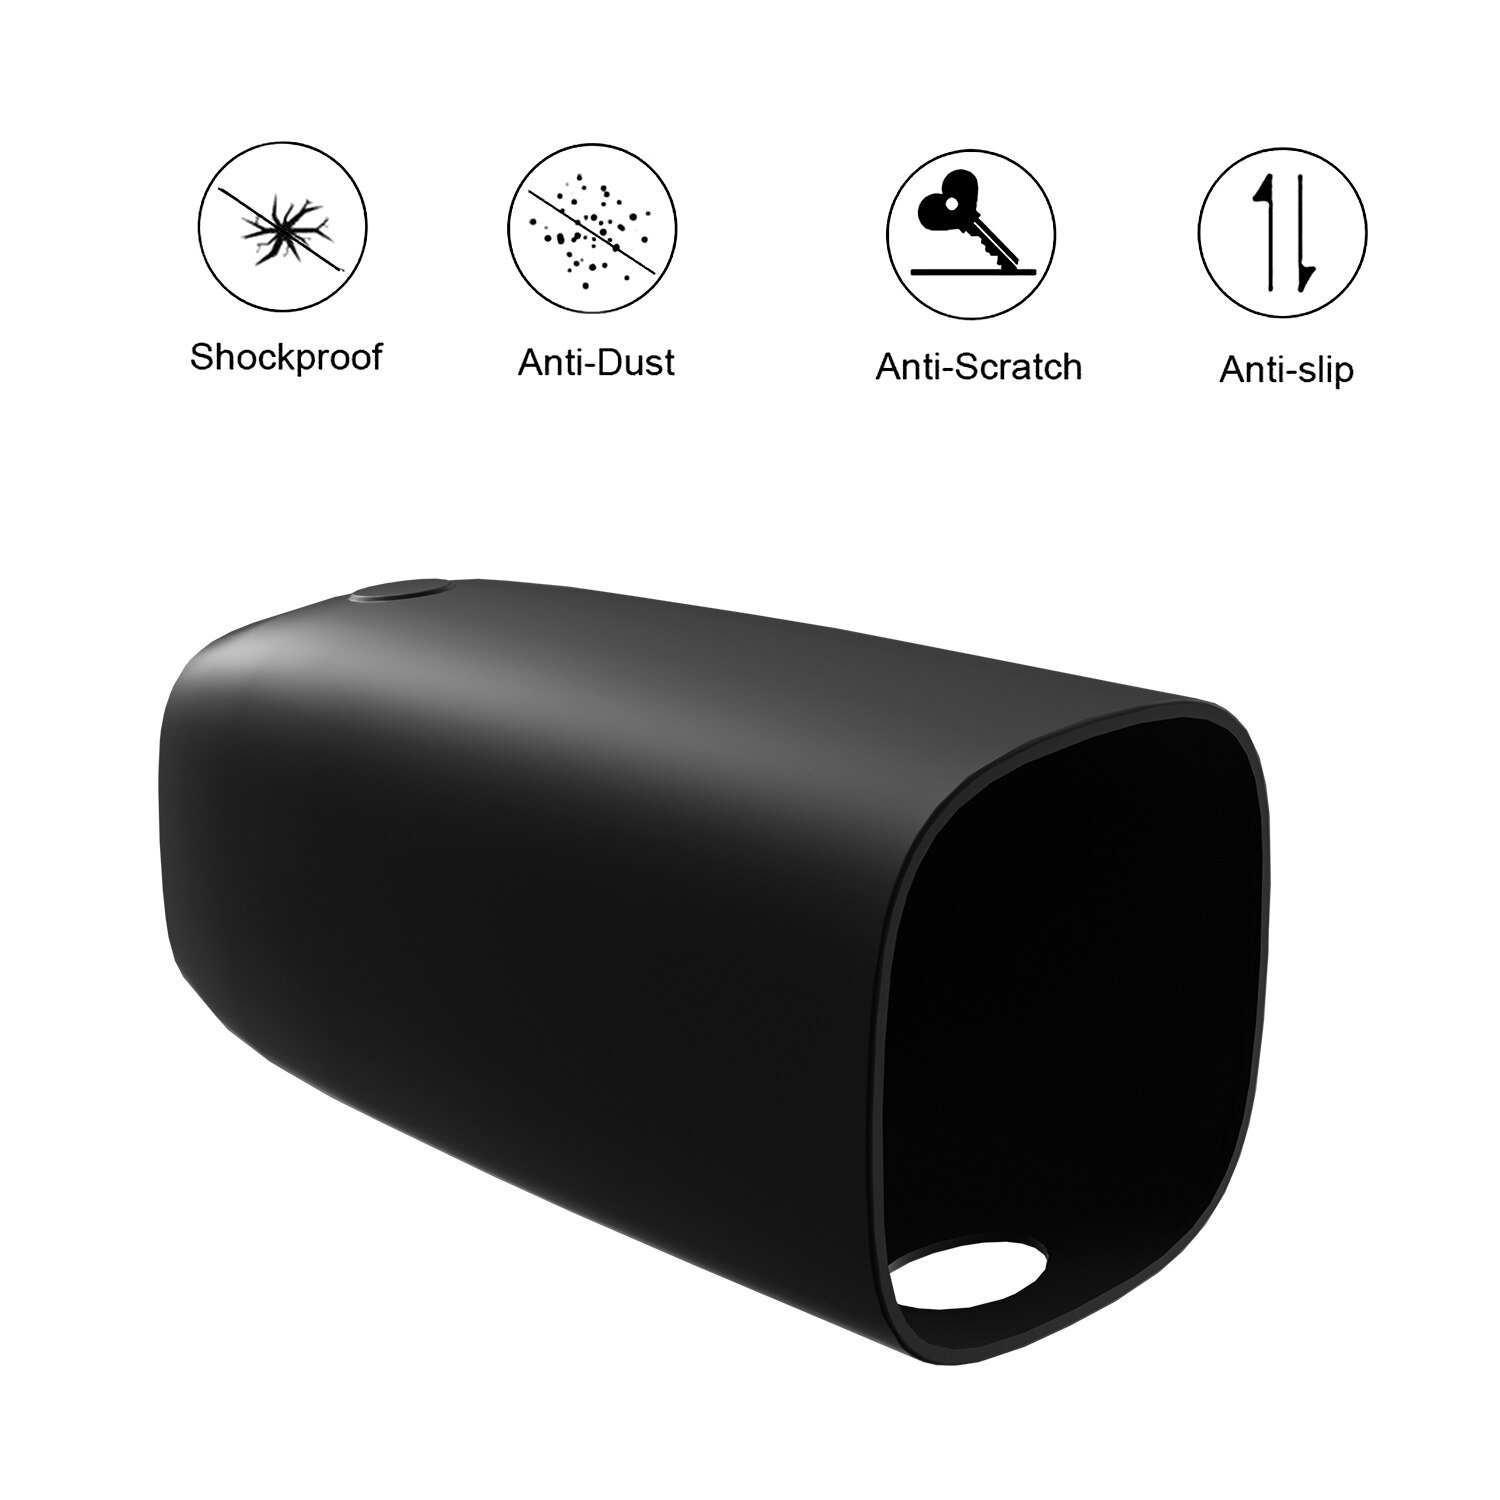 Silicone Protective Covers for eufyCam Series Anti-Scratch Camera Protective Cover Giving Security Camera Protection Accessories